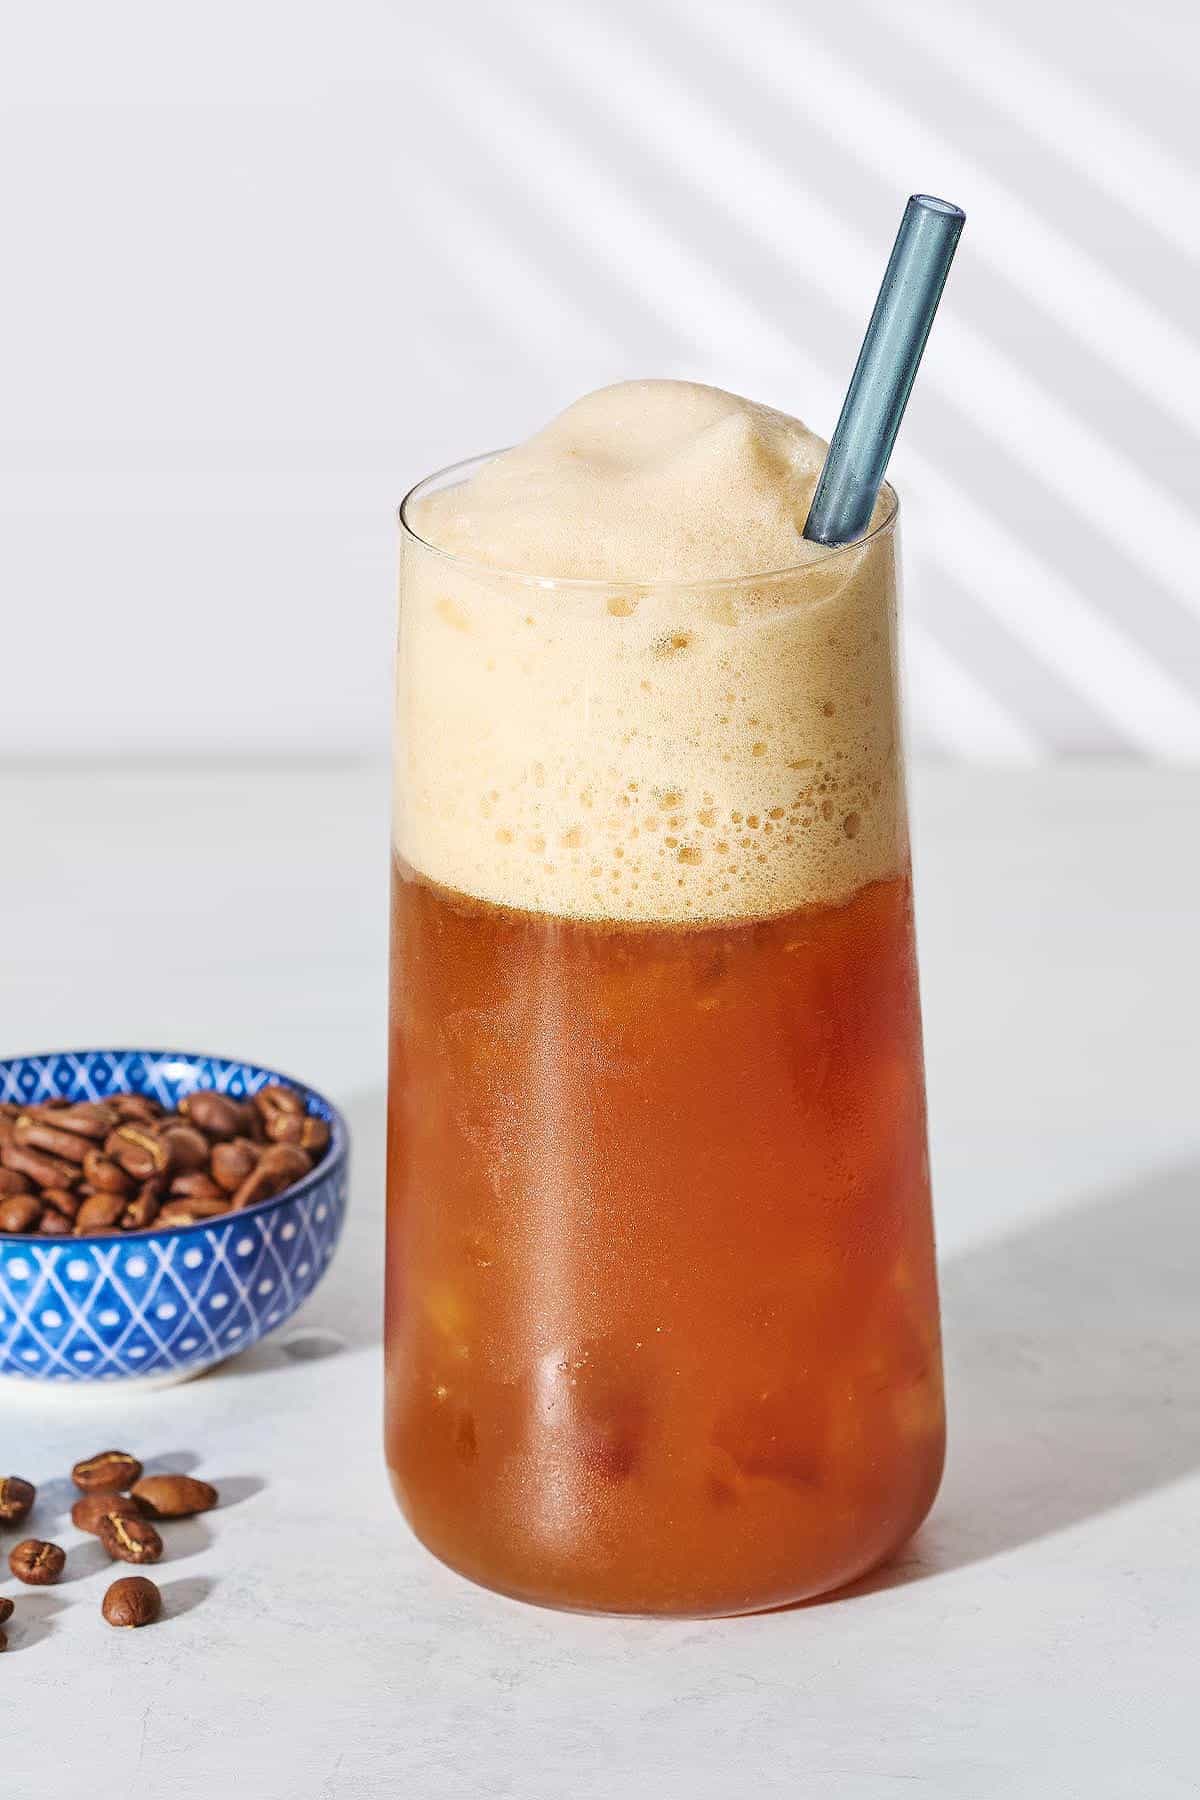 A close up of Freddo Espresso in a glass with a straw next to a bowl of coffee beans and some coffee beans on the table.